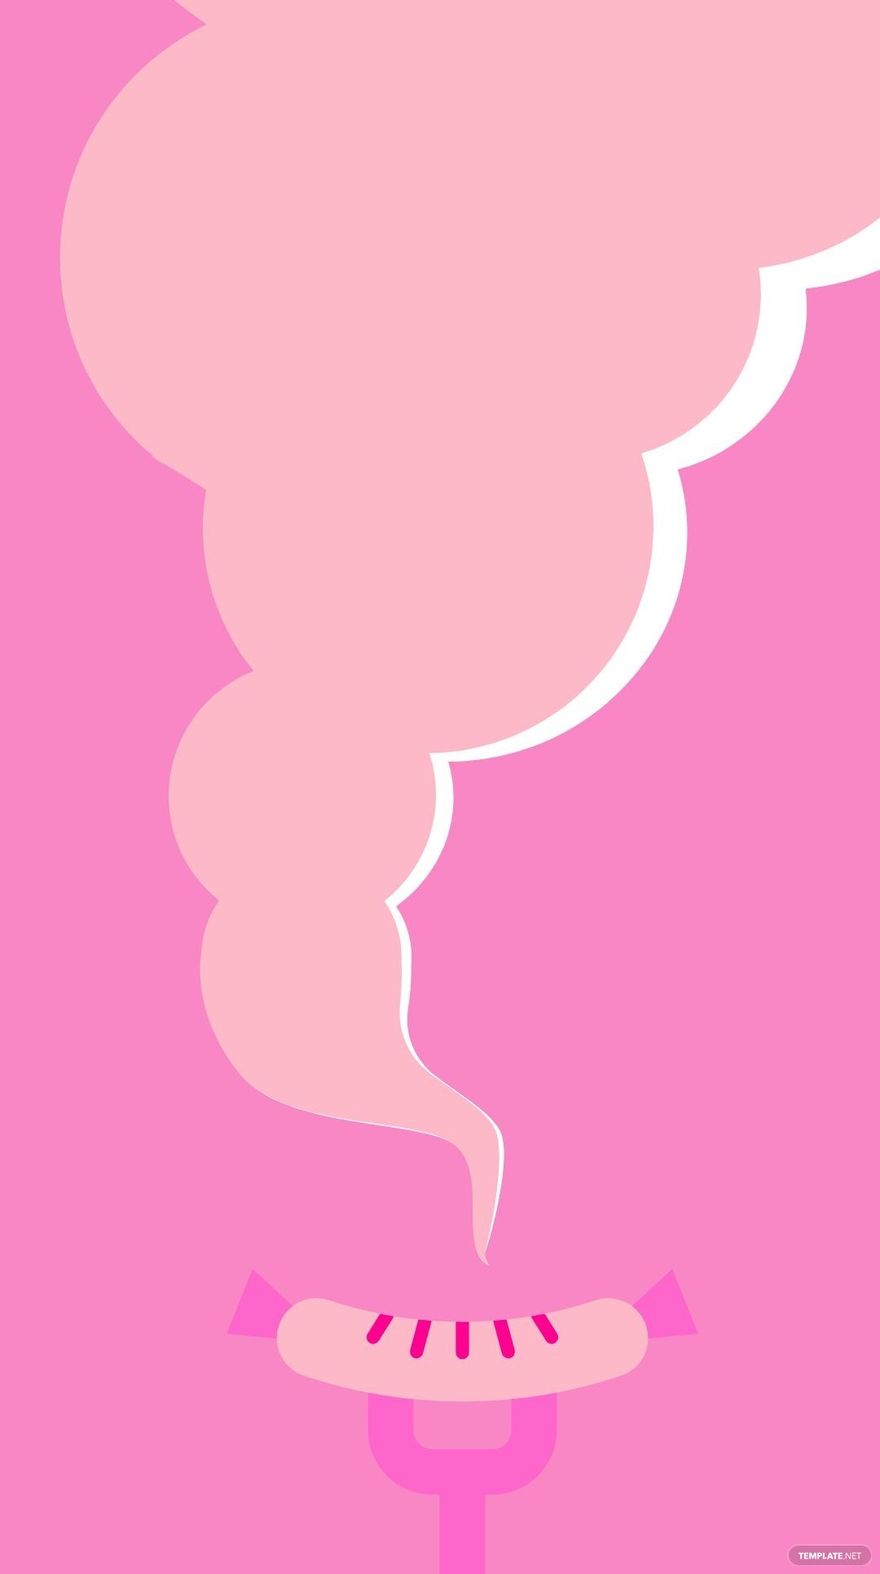 Free Pink Background Iphone in JPEG